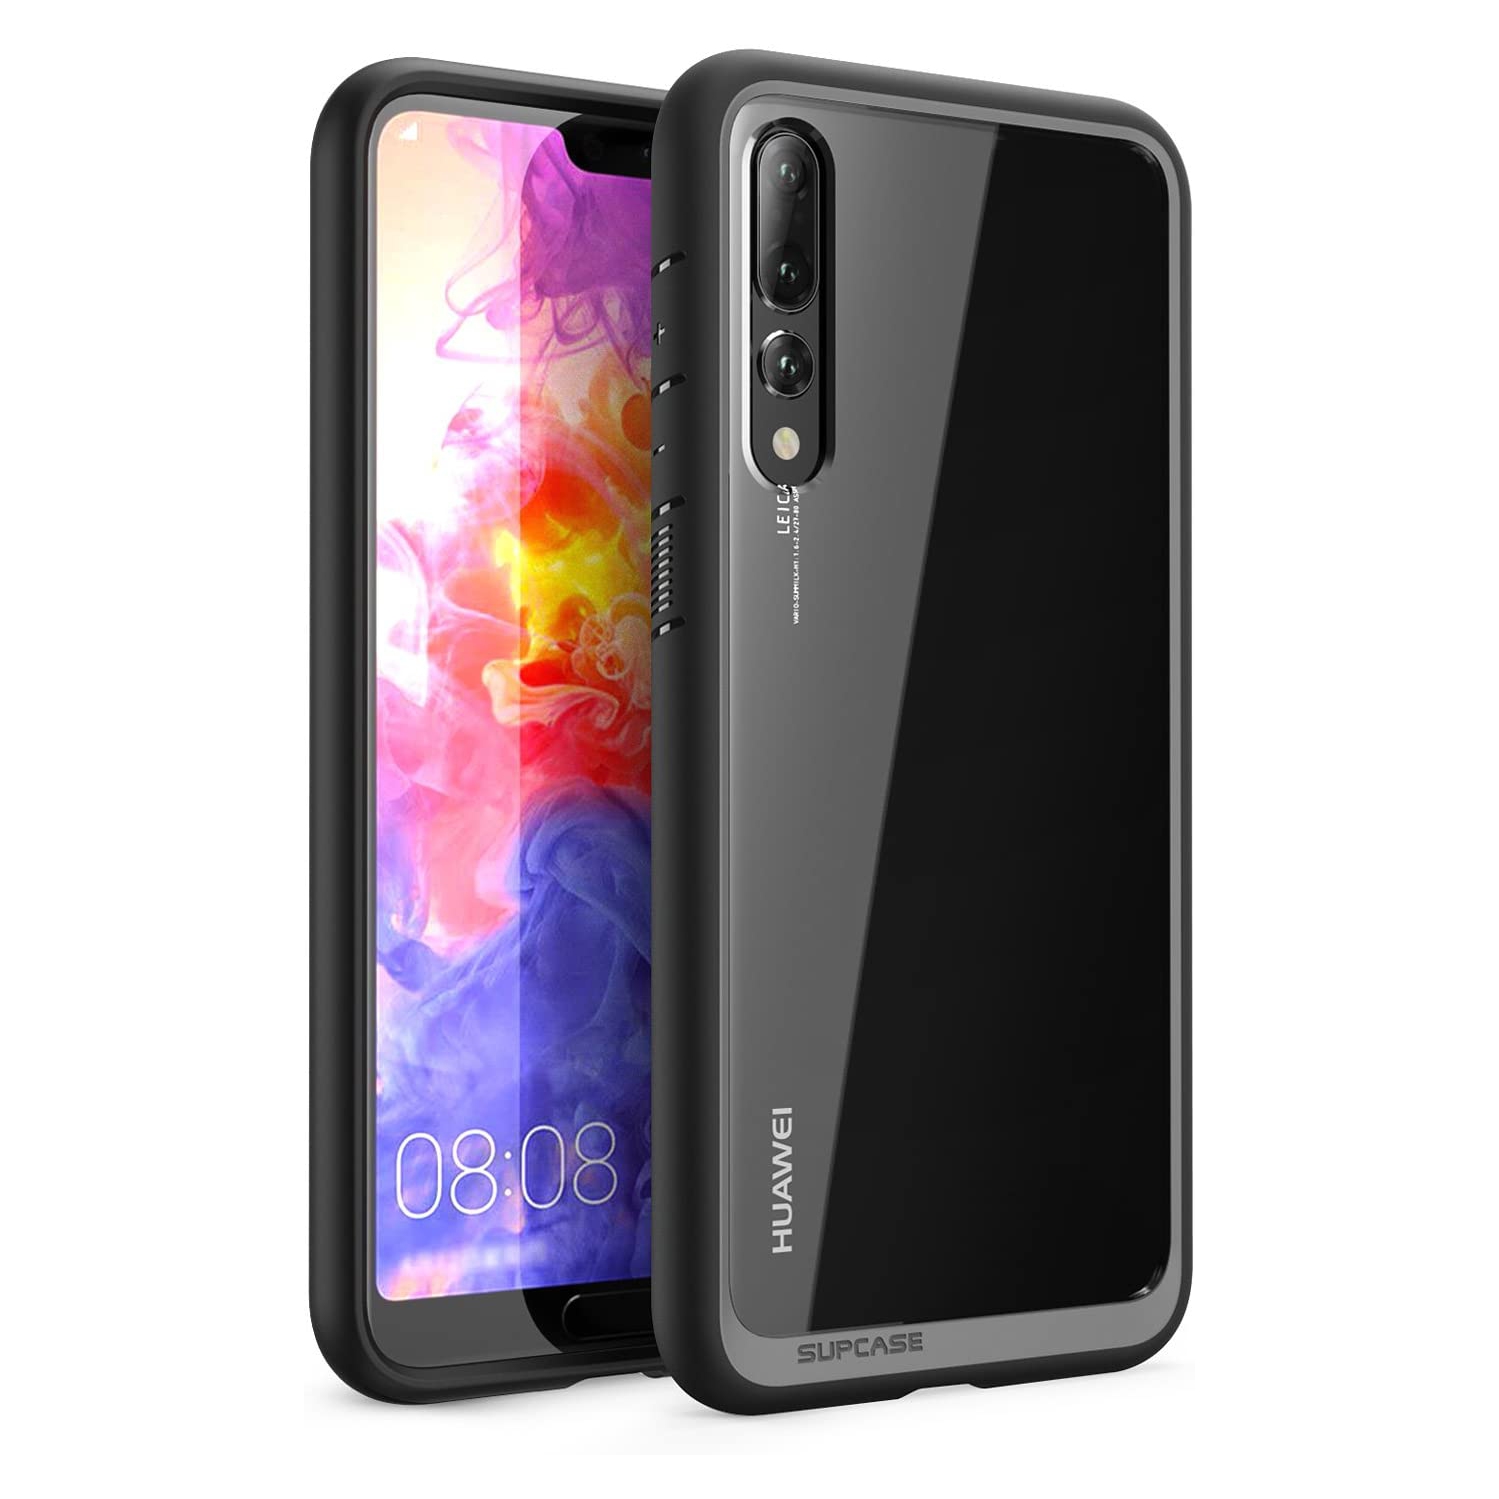 Huawei P20 Pro Case, Unicorn Beetle Style Series Premium Hybrid Protective Clear Case for Huawei P20